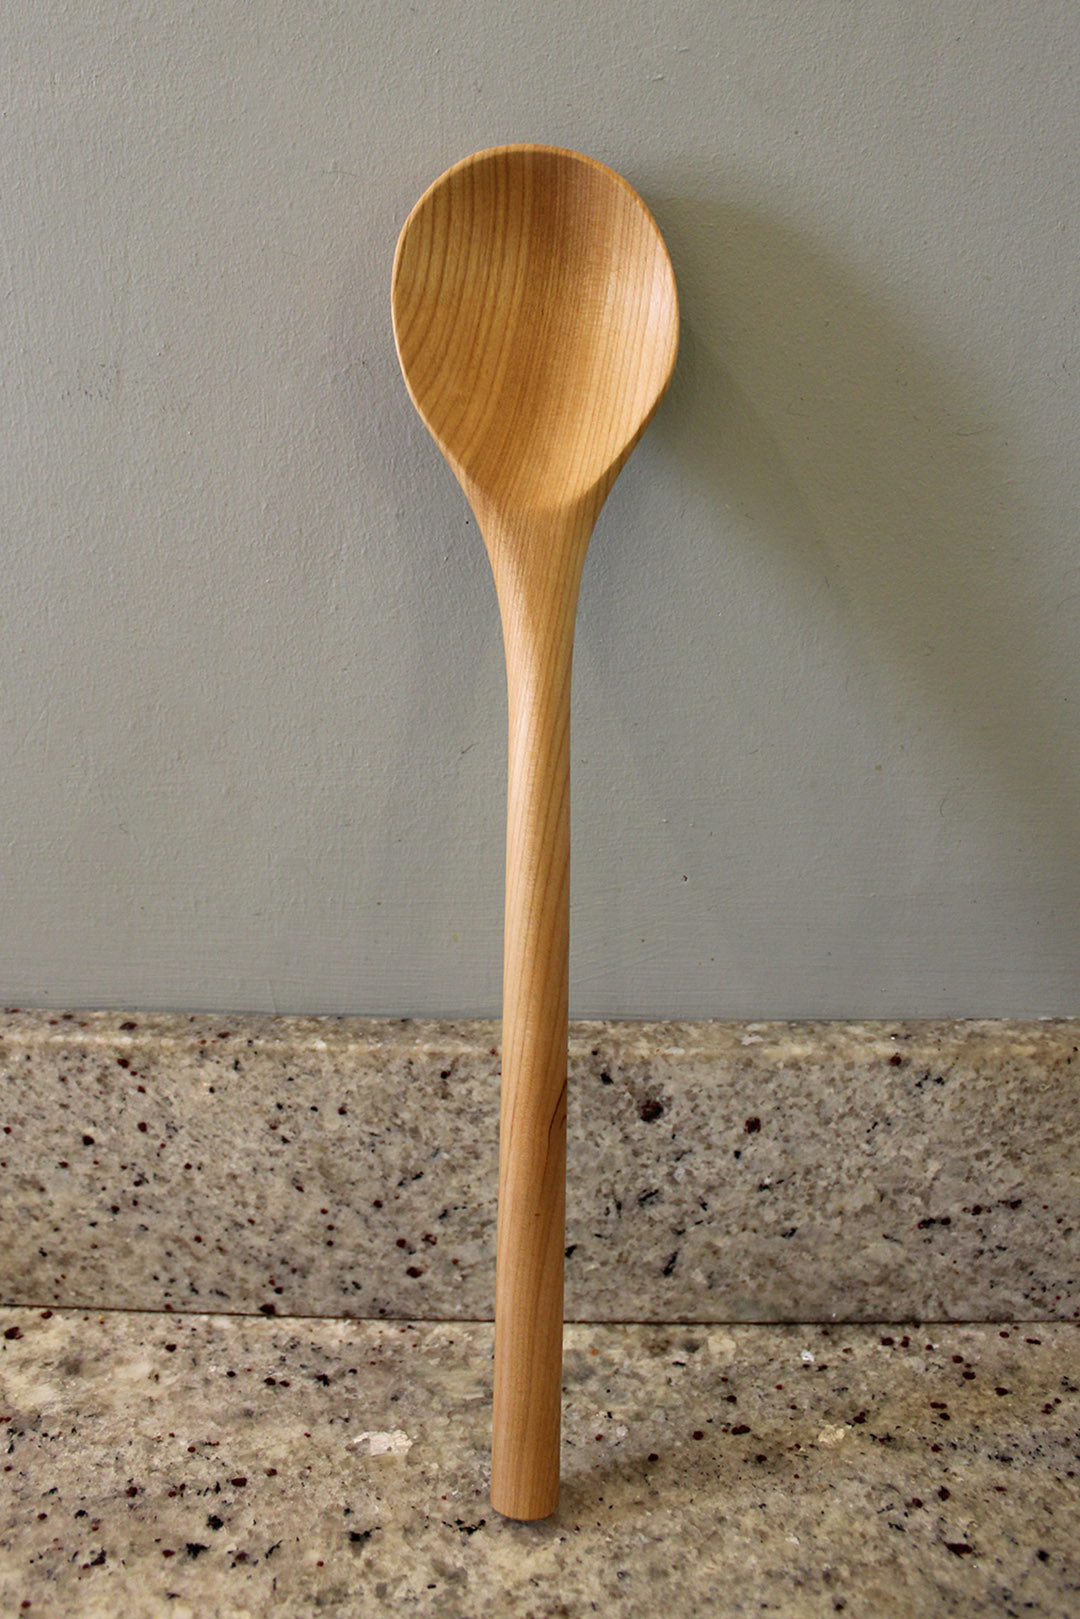 Big stirrer cooking spoon hand carved from Cherry, in Fife. Scottish Textiles Showcase.